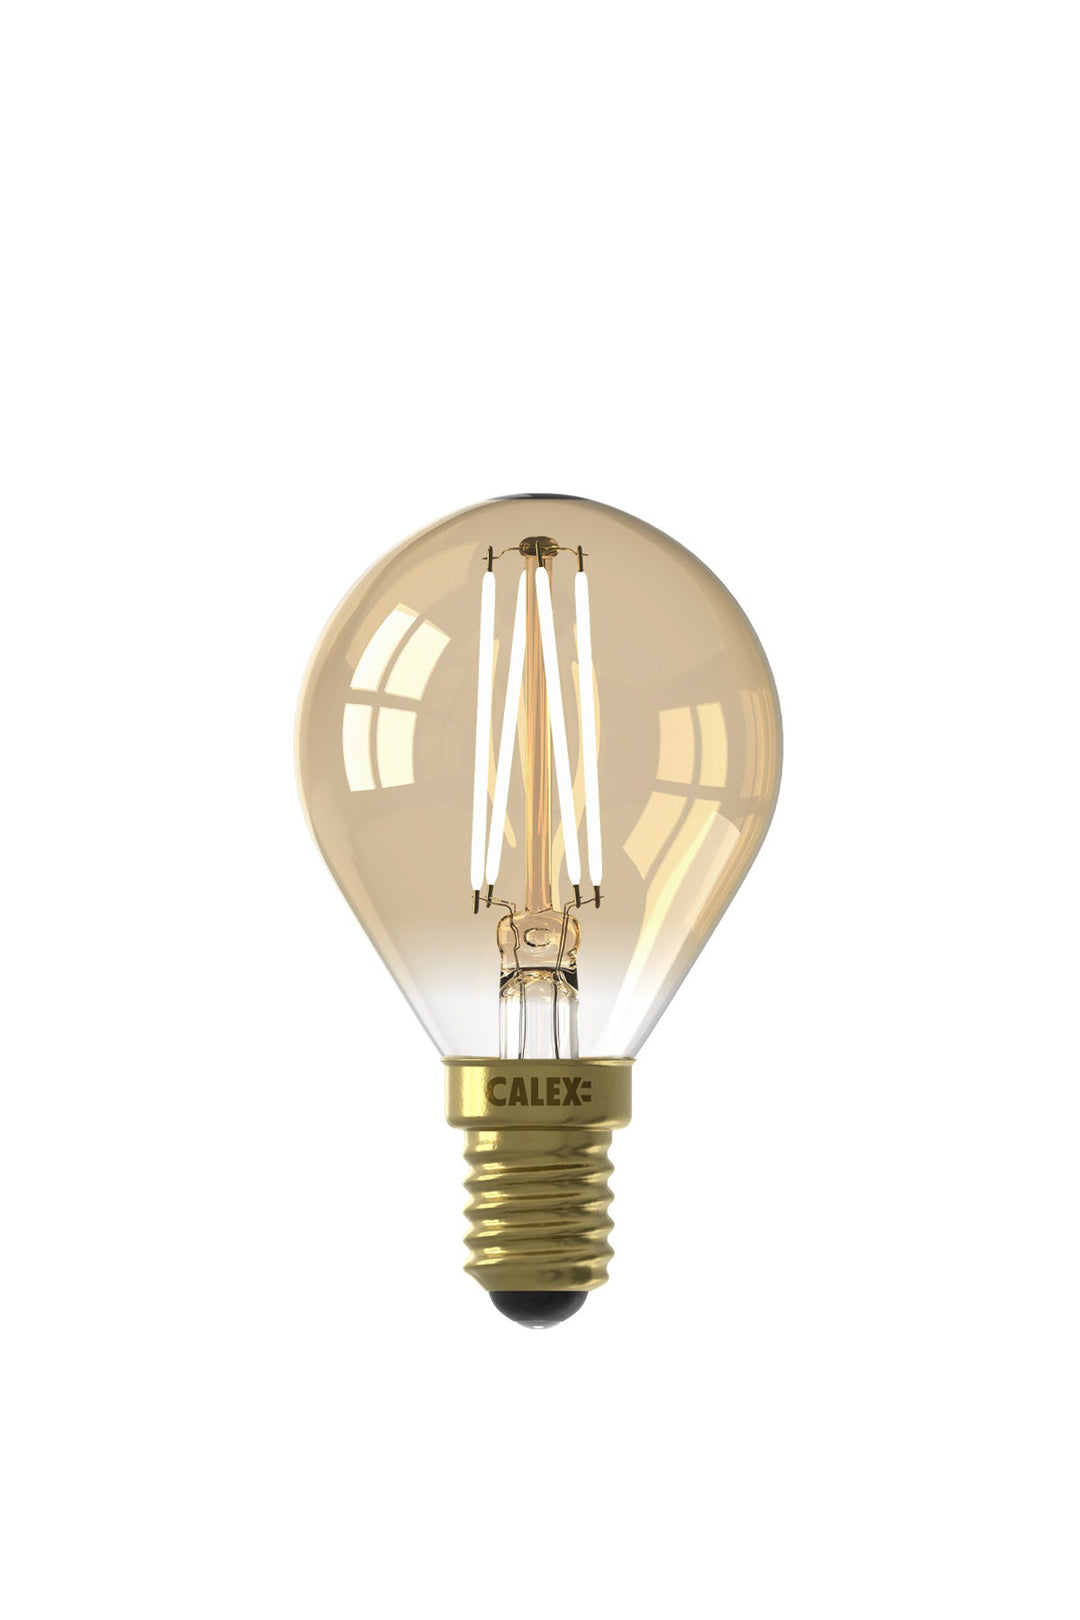 Calex LED Warm Filament Ball Lamp P45, Gold, E14, Dimmable 1101004400